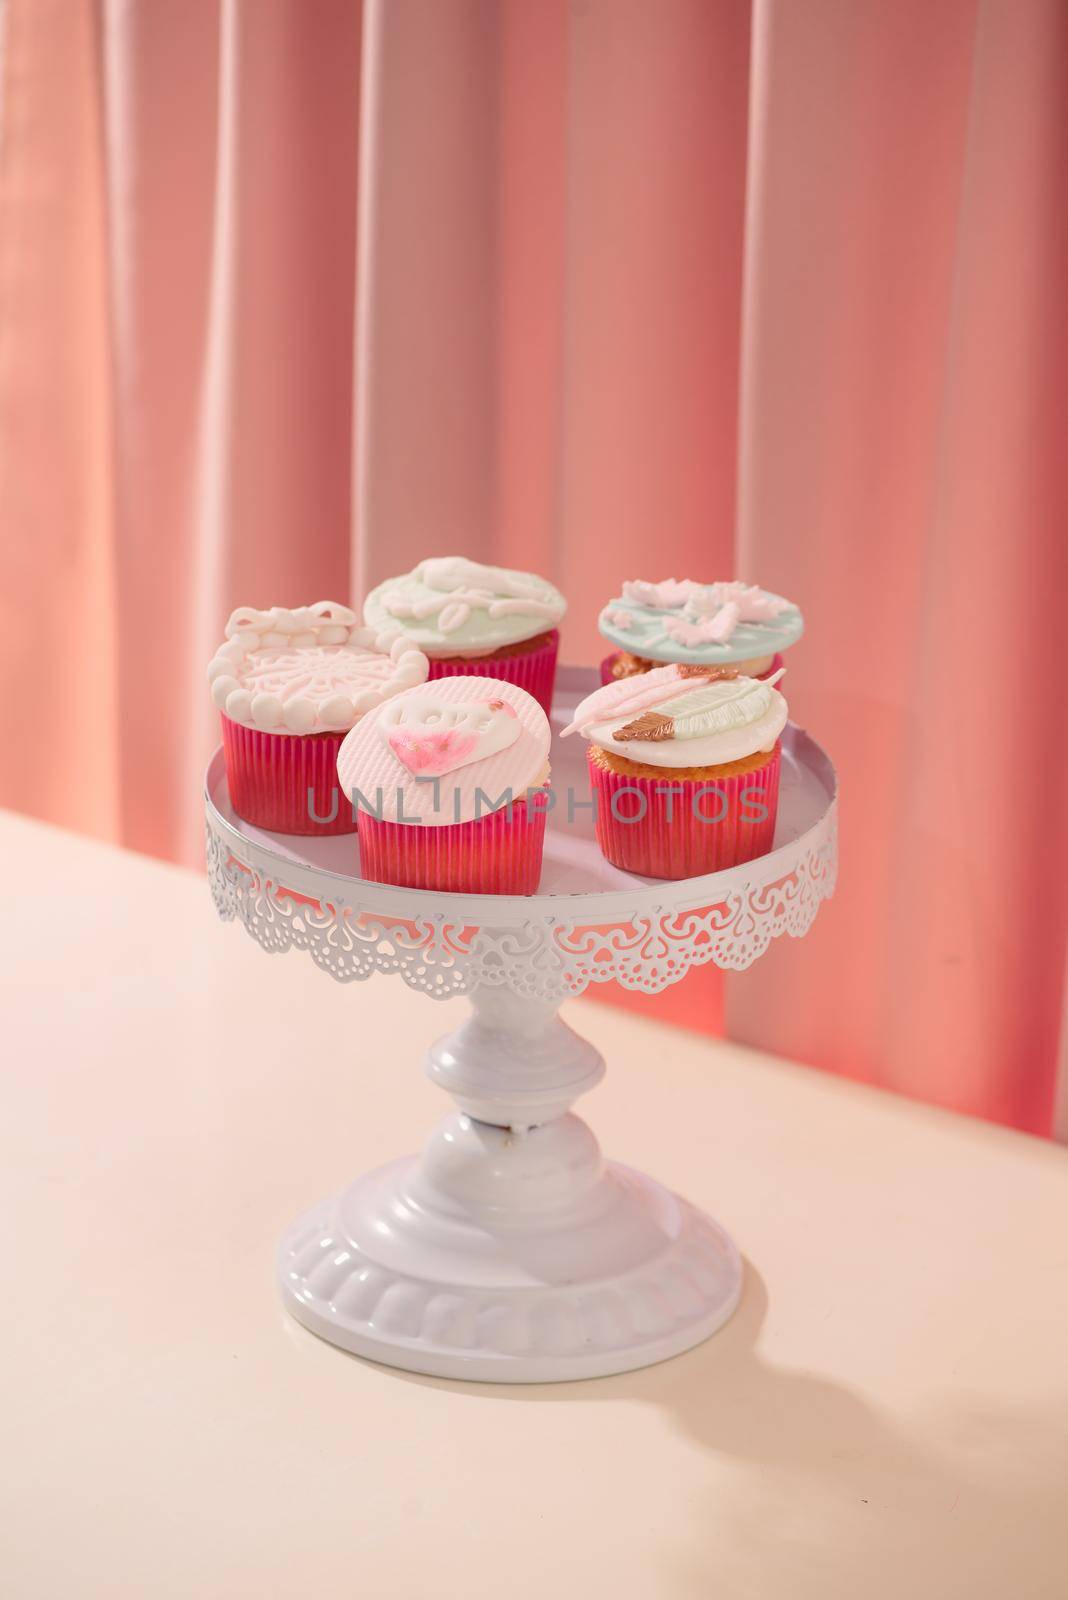 Many yummy cupcakes. Valentine sweet love cupcake on table on light background by makidotvn